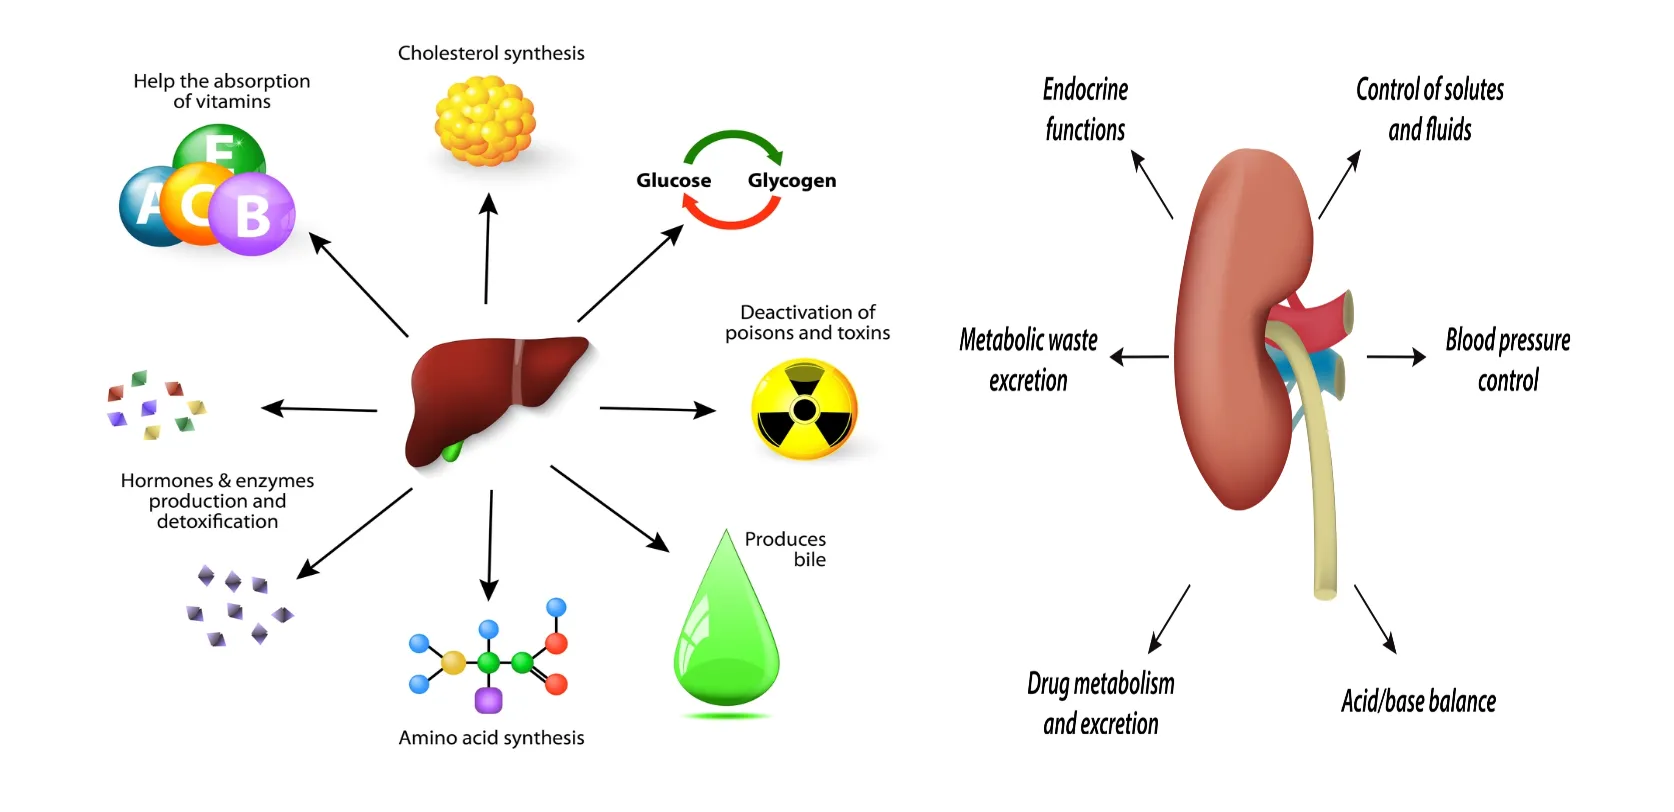 The liver and kidneys have many metabolic functions in common.